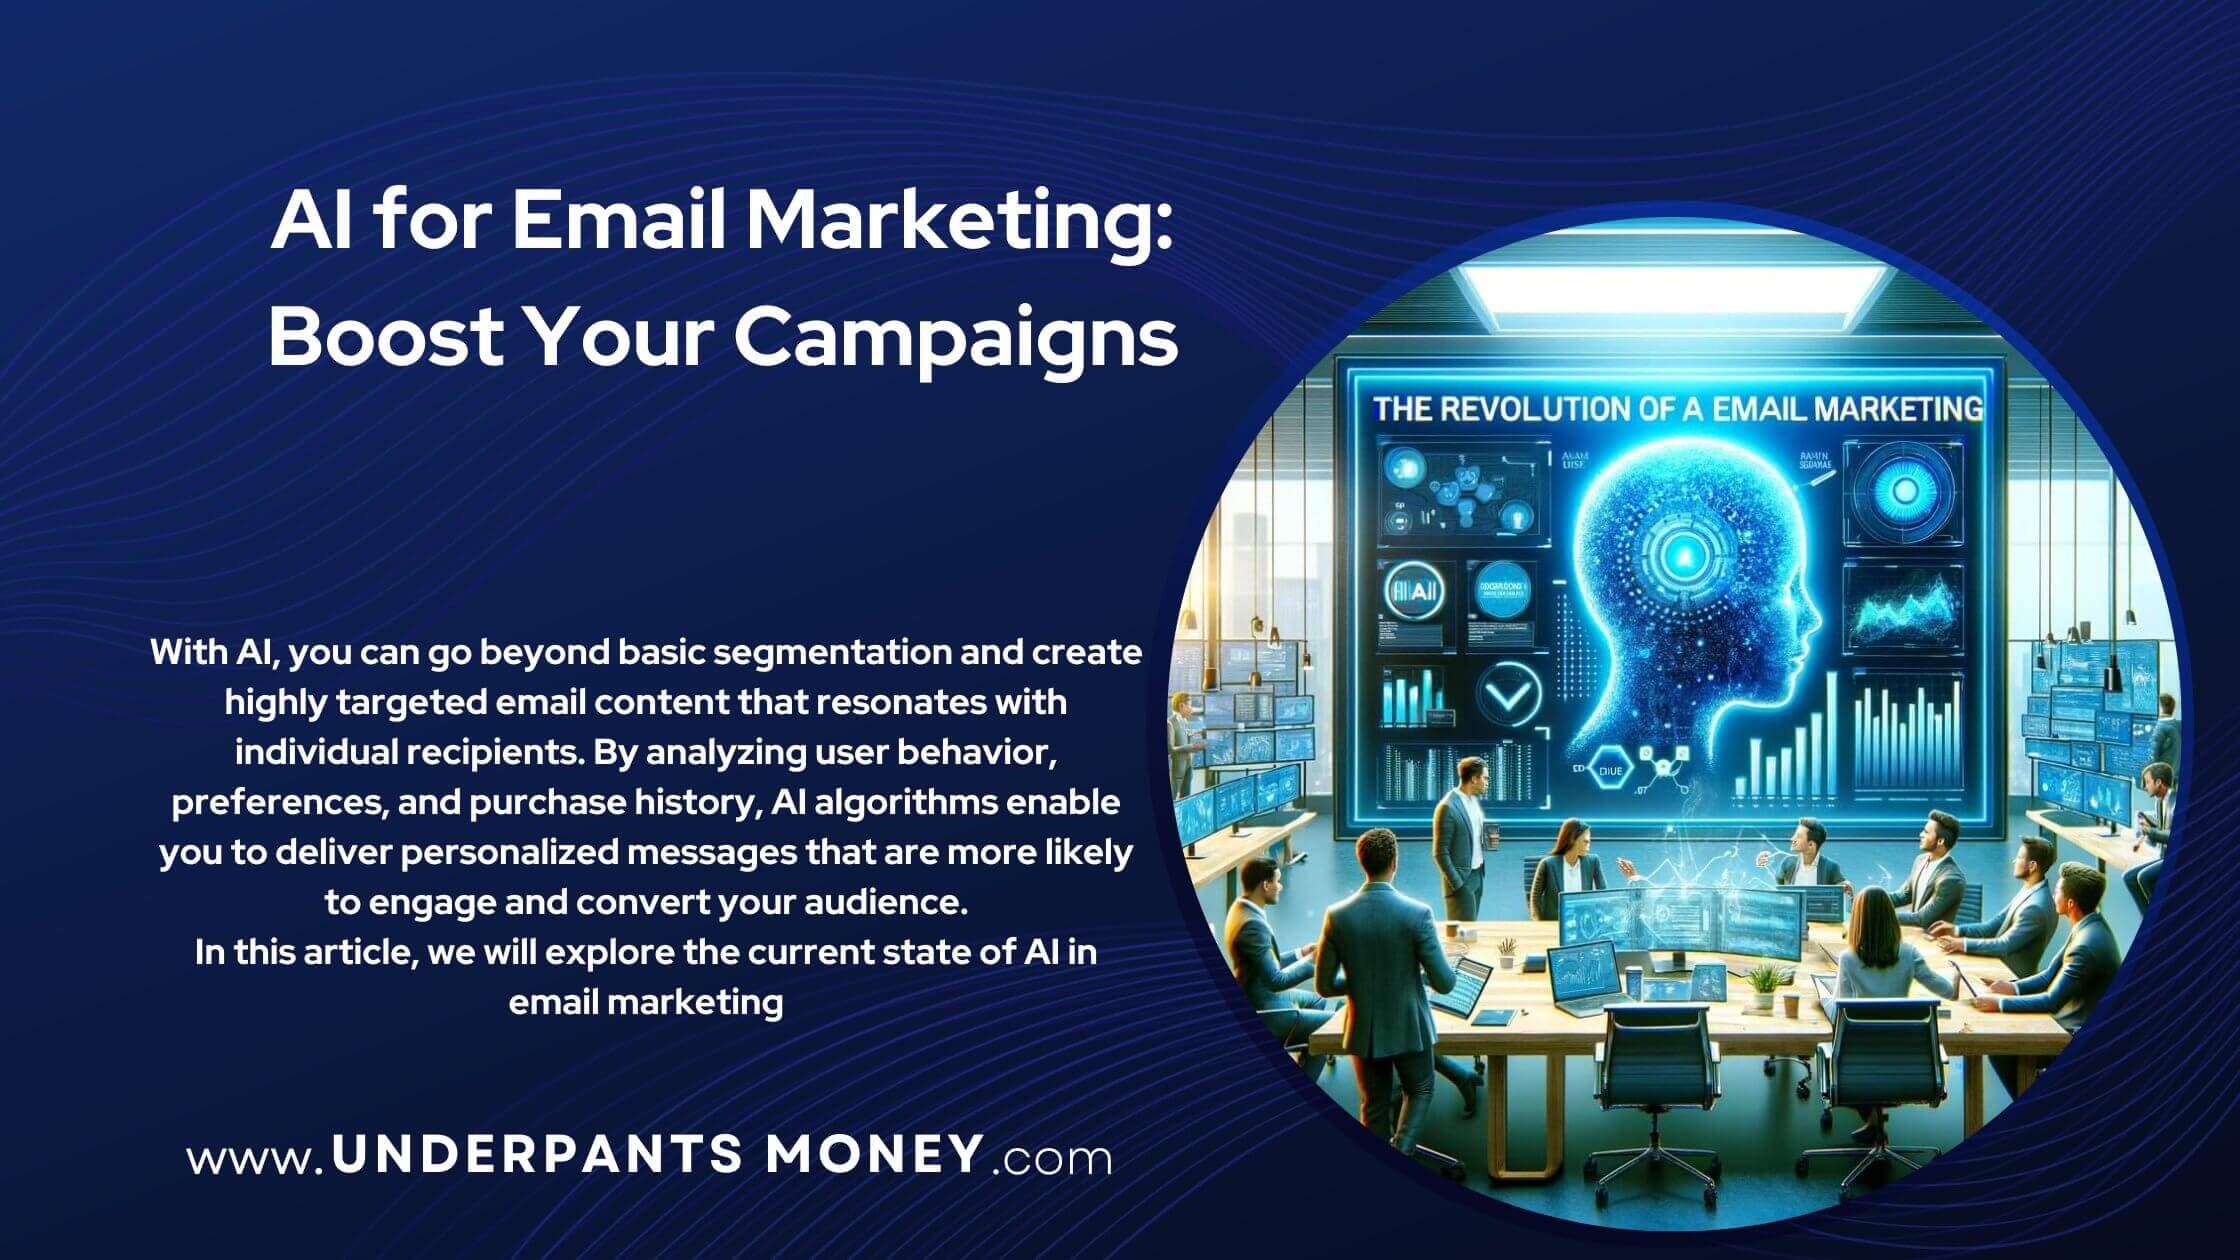 Ai for email marketing title and description on blue with image of ai brain helping people in an office